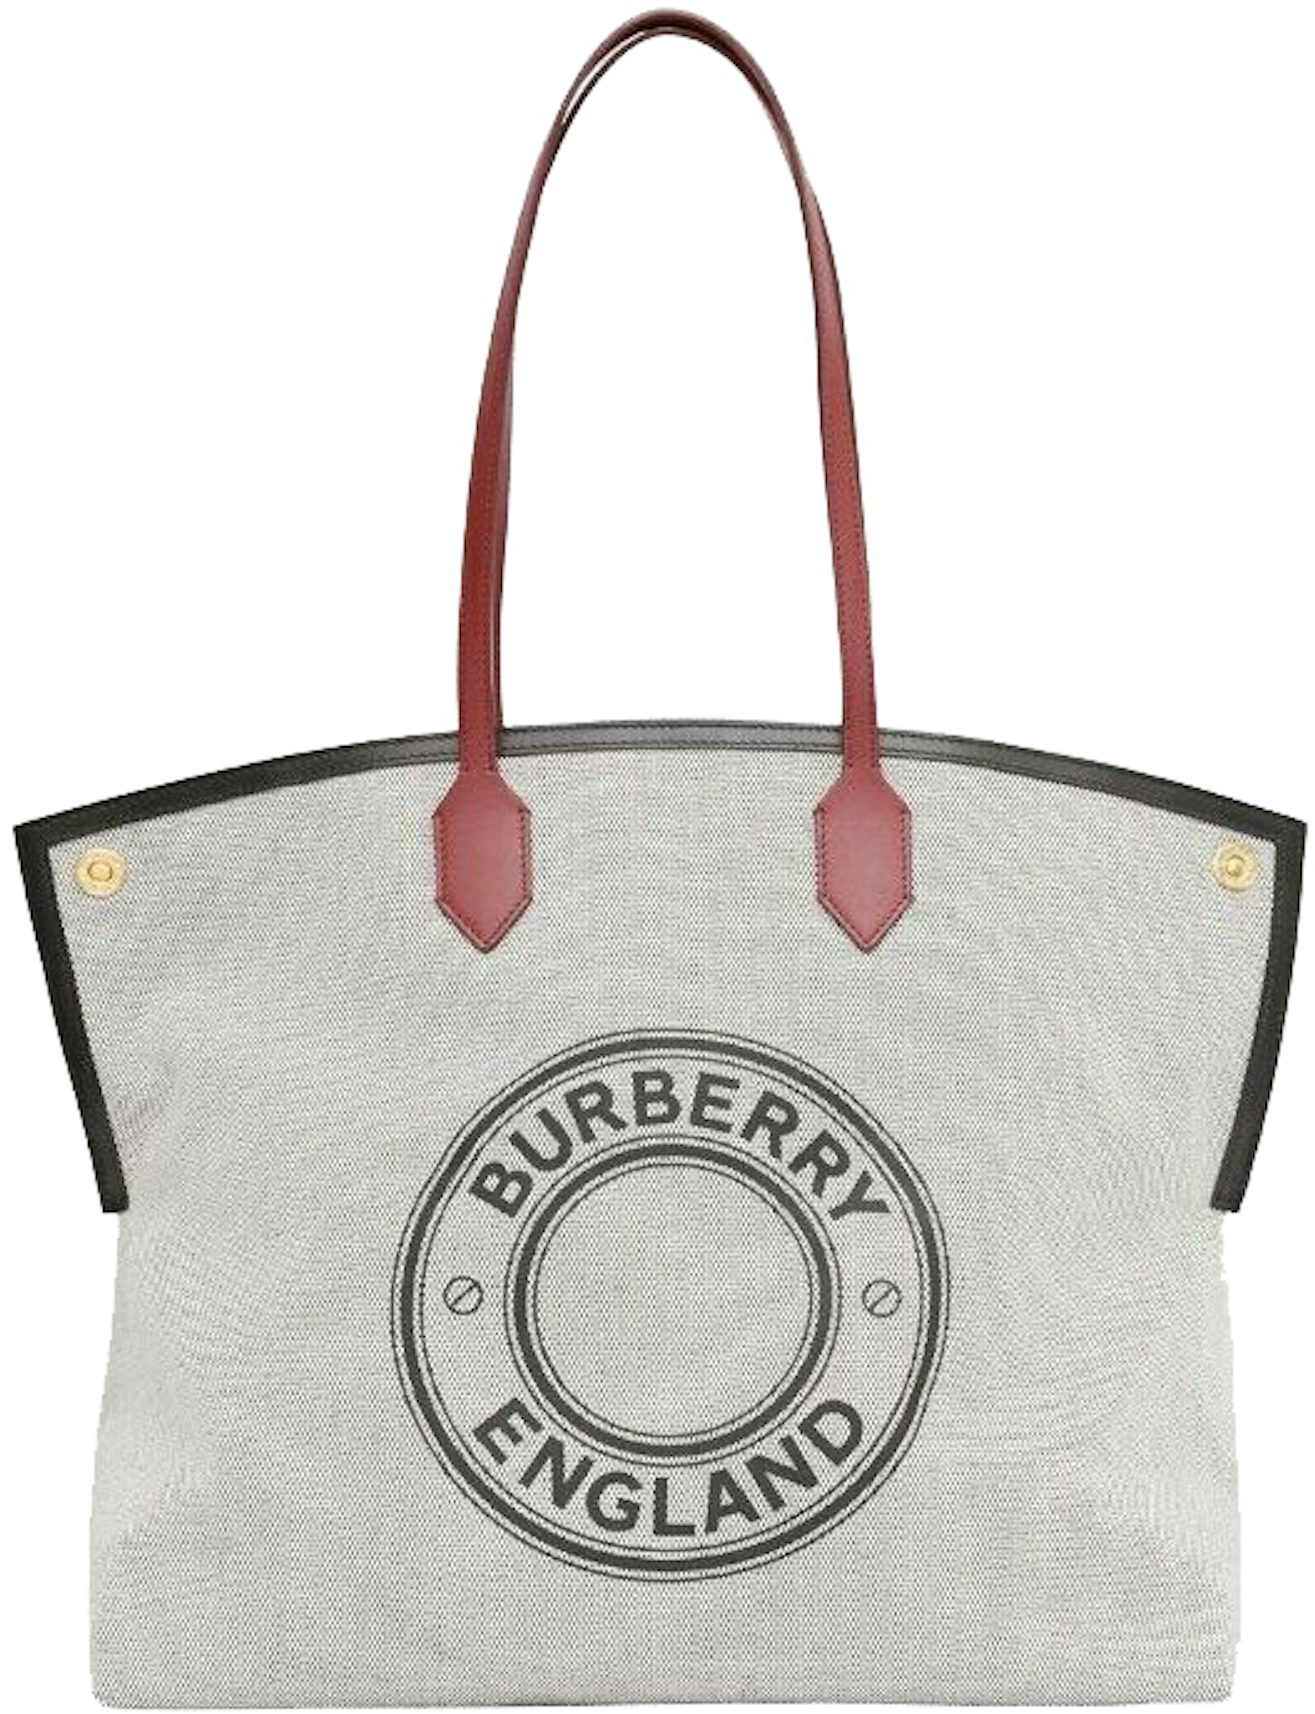 BURBERRY: Large Society Tote Bag in cotton canvas with graphic and logo -  Natural